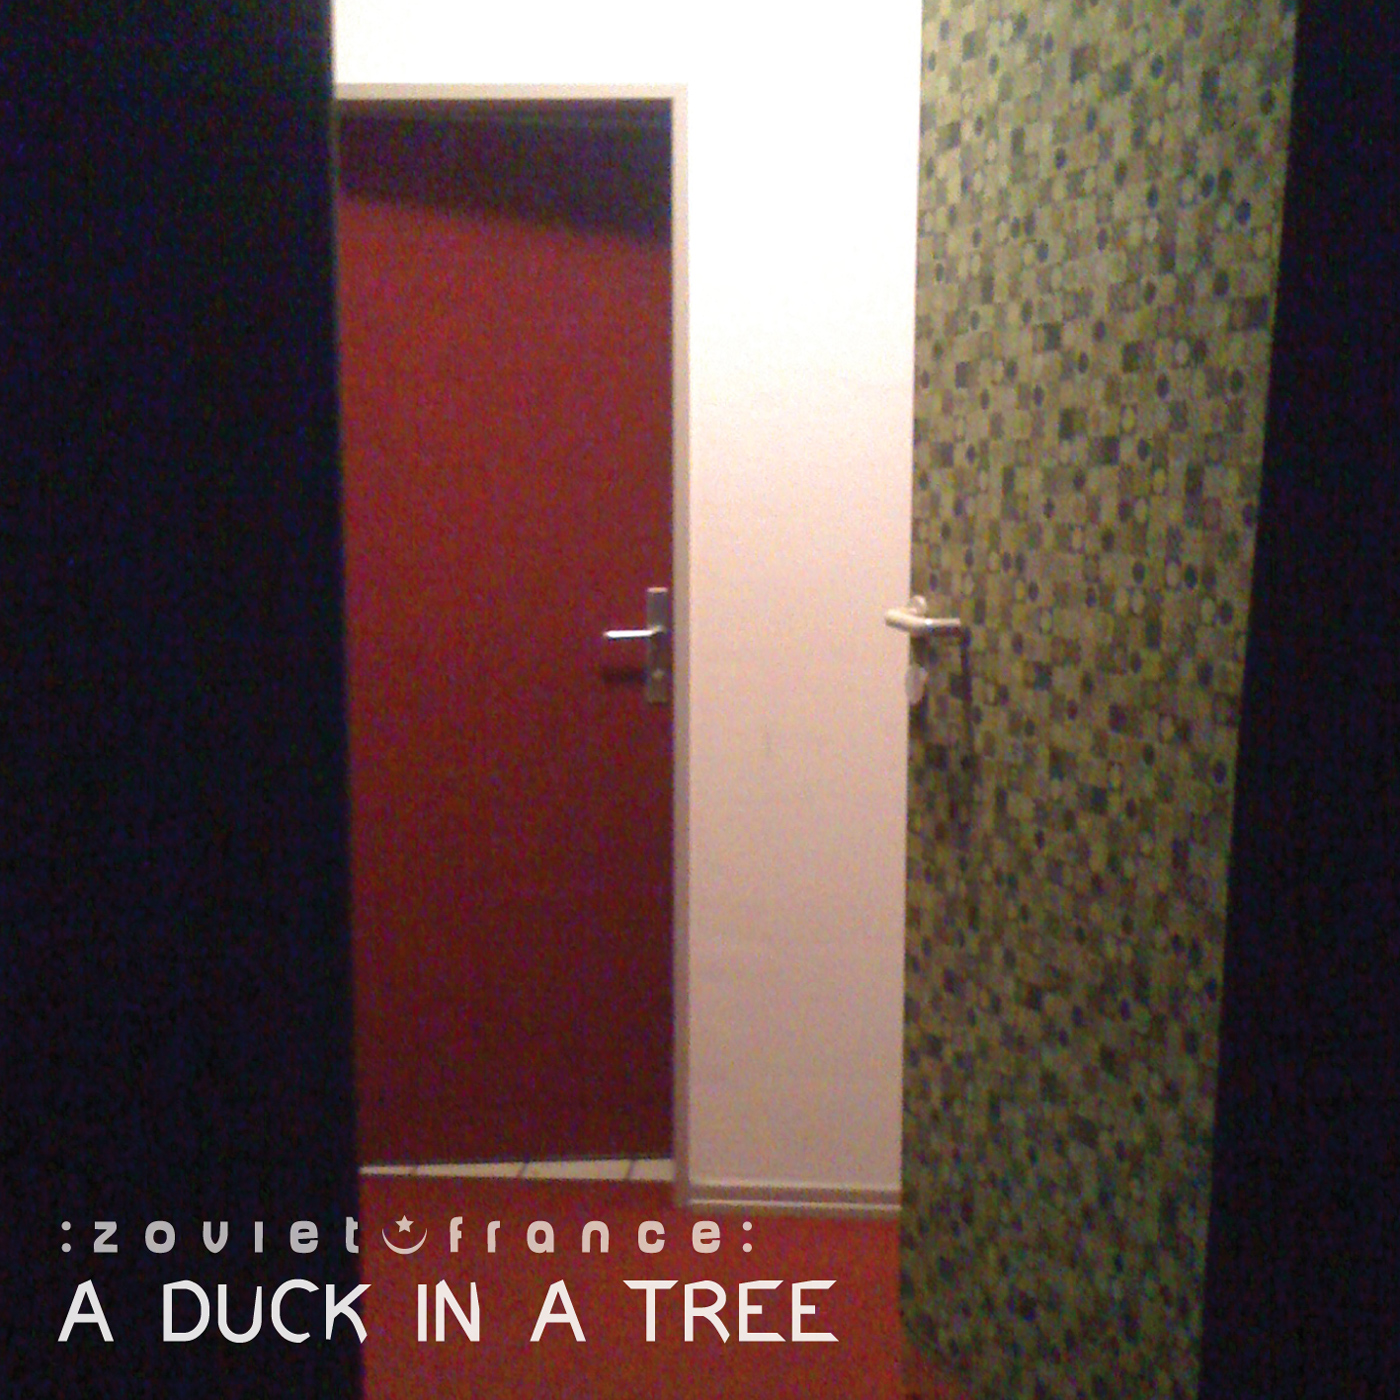 A Duck in a Tree 2013-07-13 | About an Hour Ago